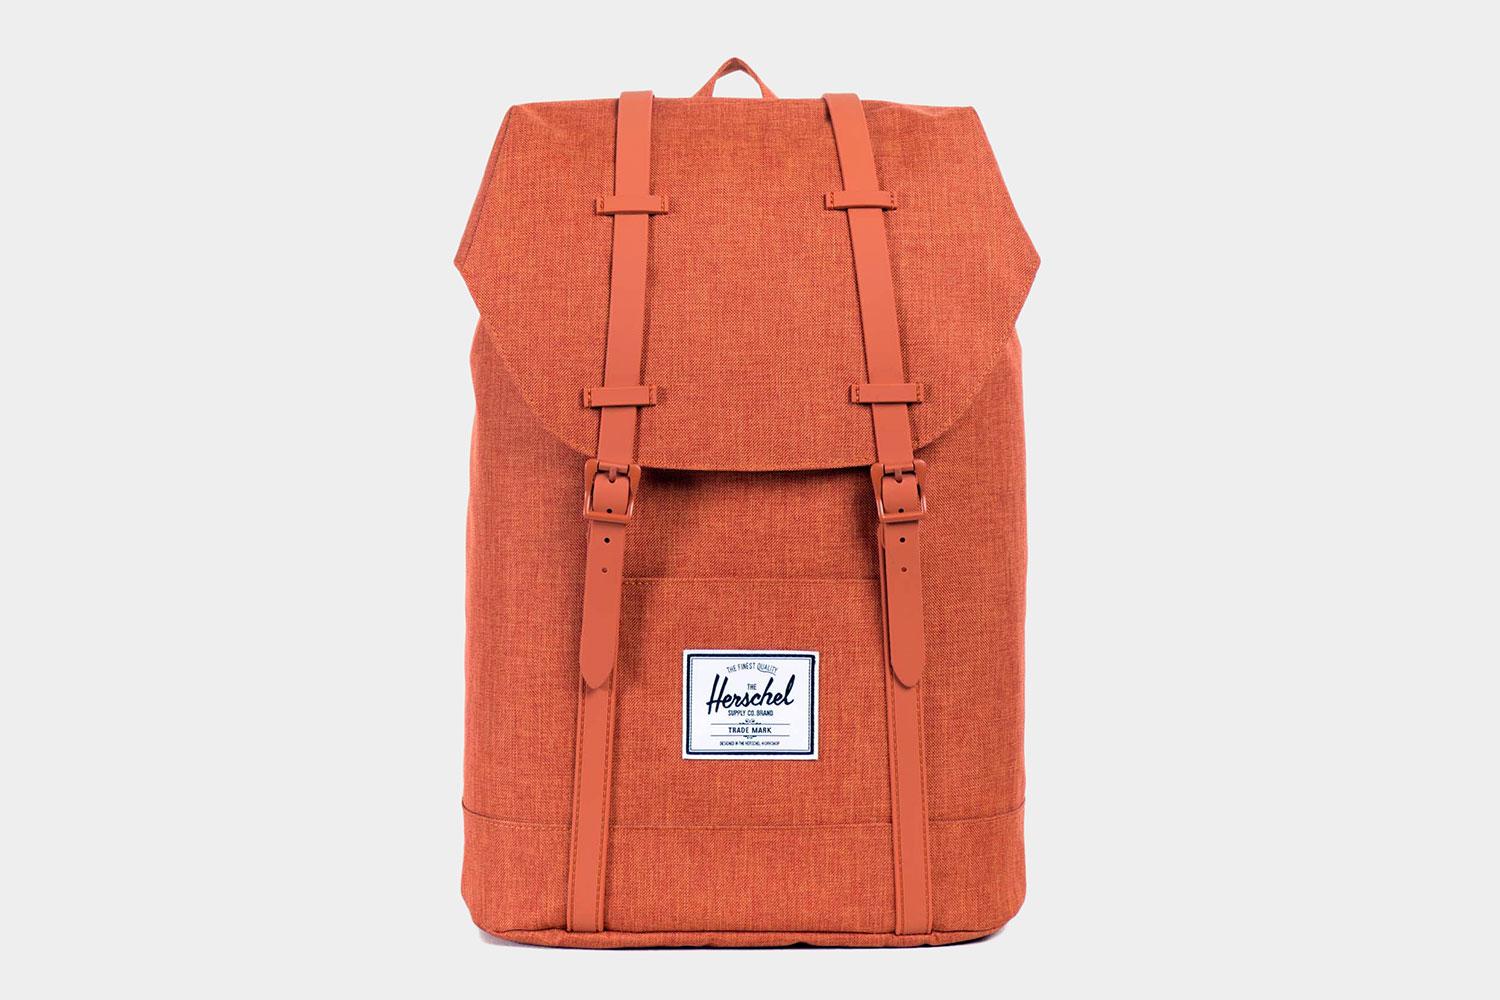 A frontal view of a Herschel Supply Co Retreat backpack.